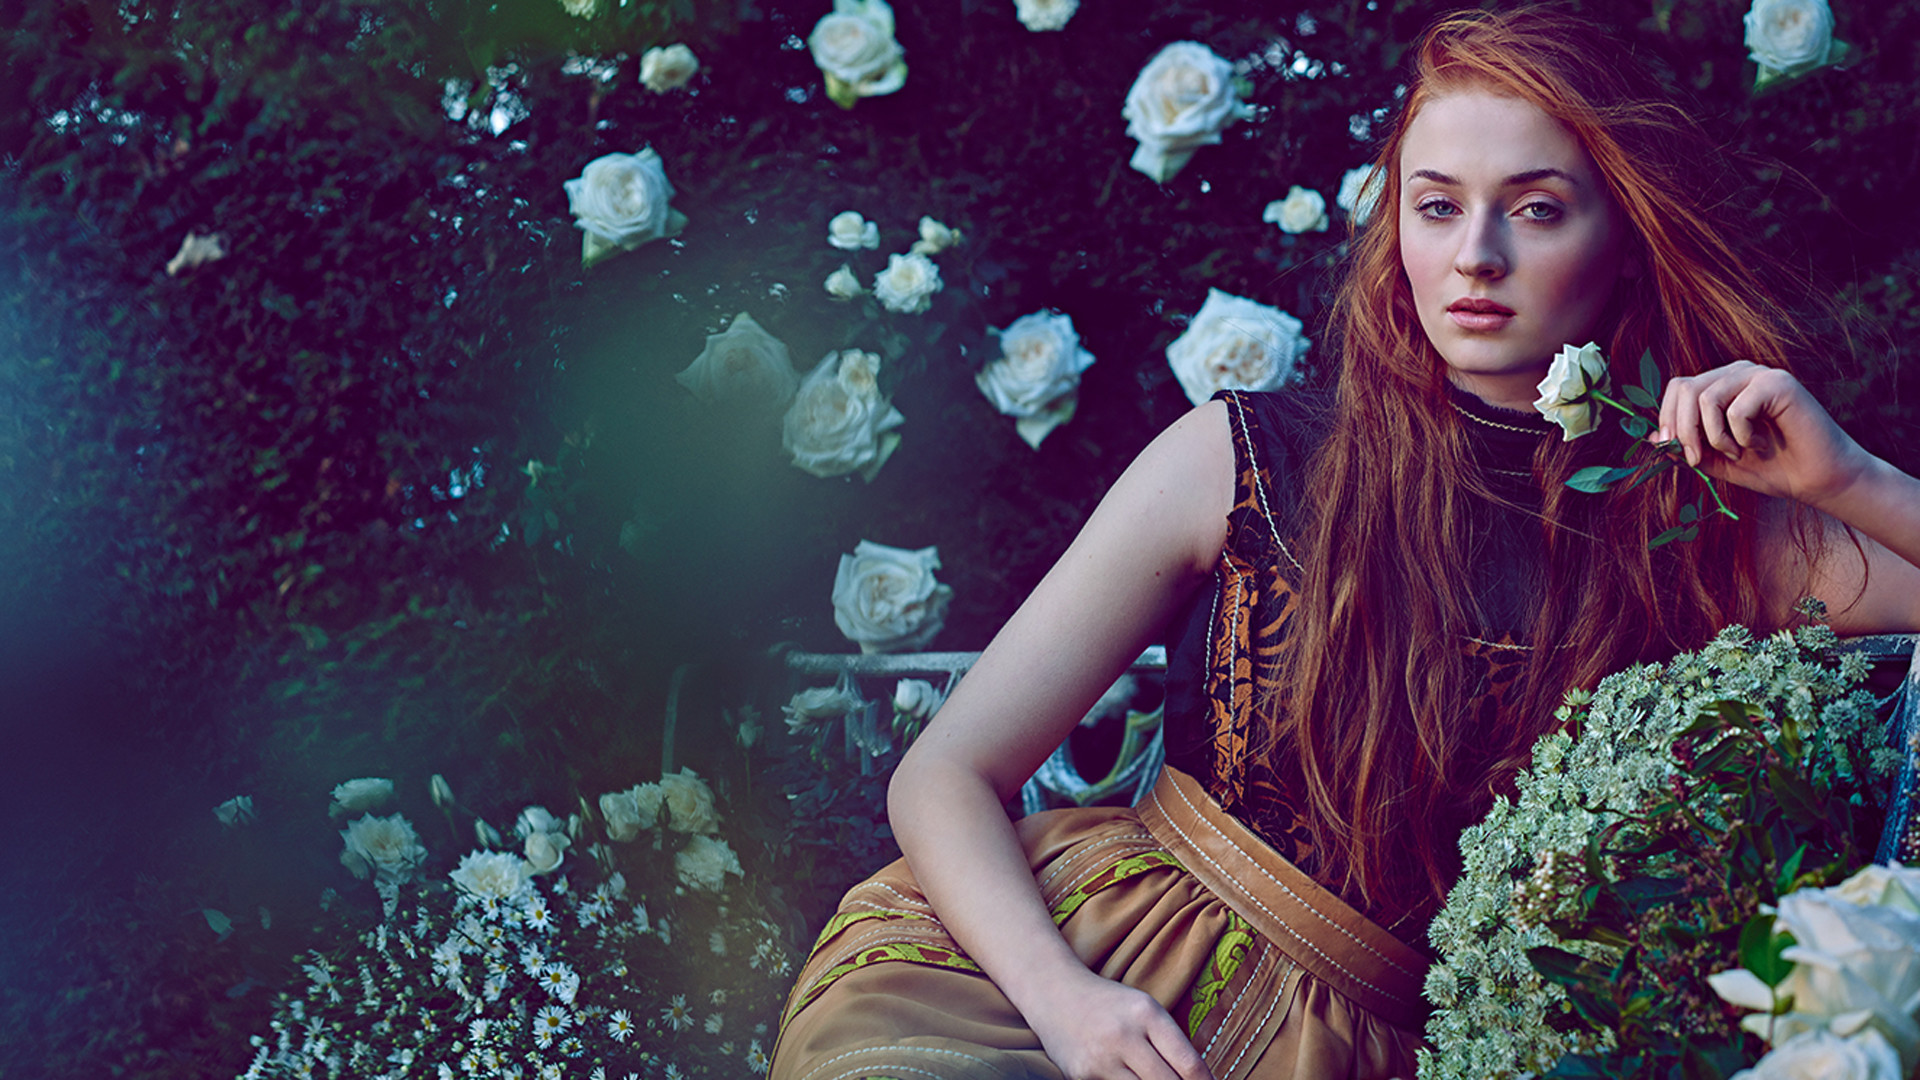 1920x1080 HD Sophie Turner Wallpapers – HdCoolWallpapers.Com